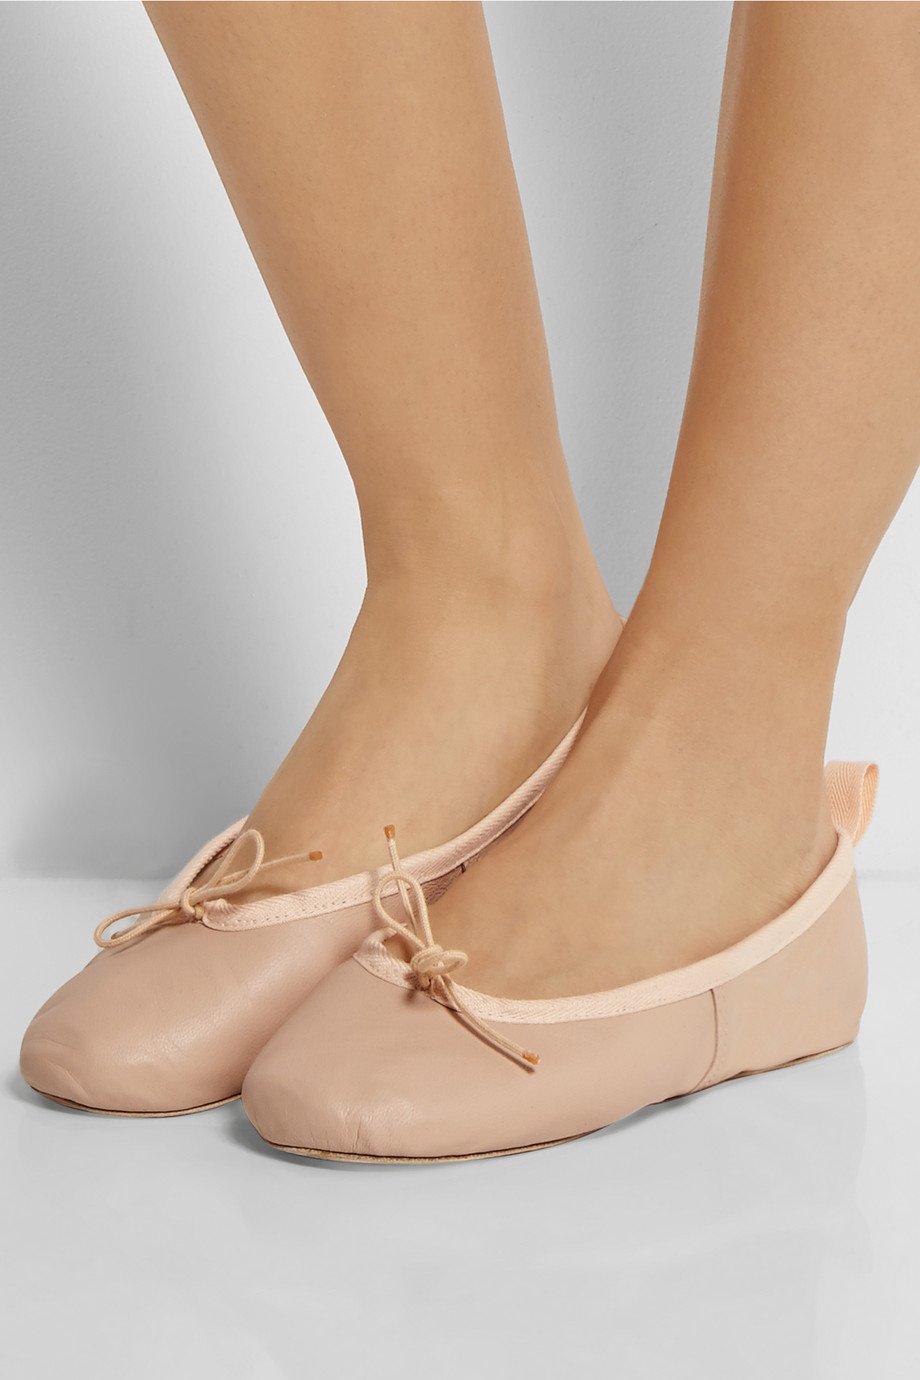 Lyst - Ballet beautiful Leather Ballet Flats in Pink